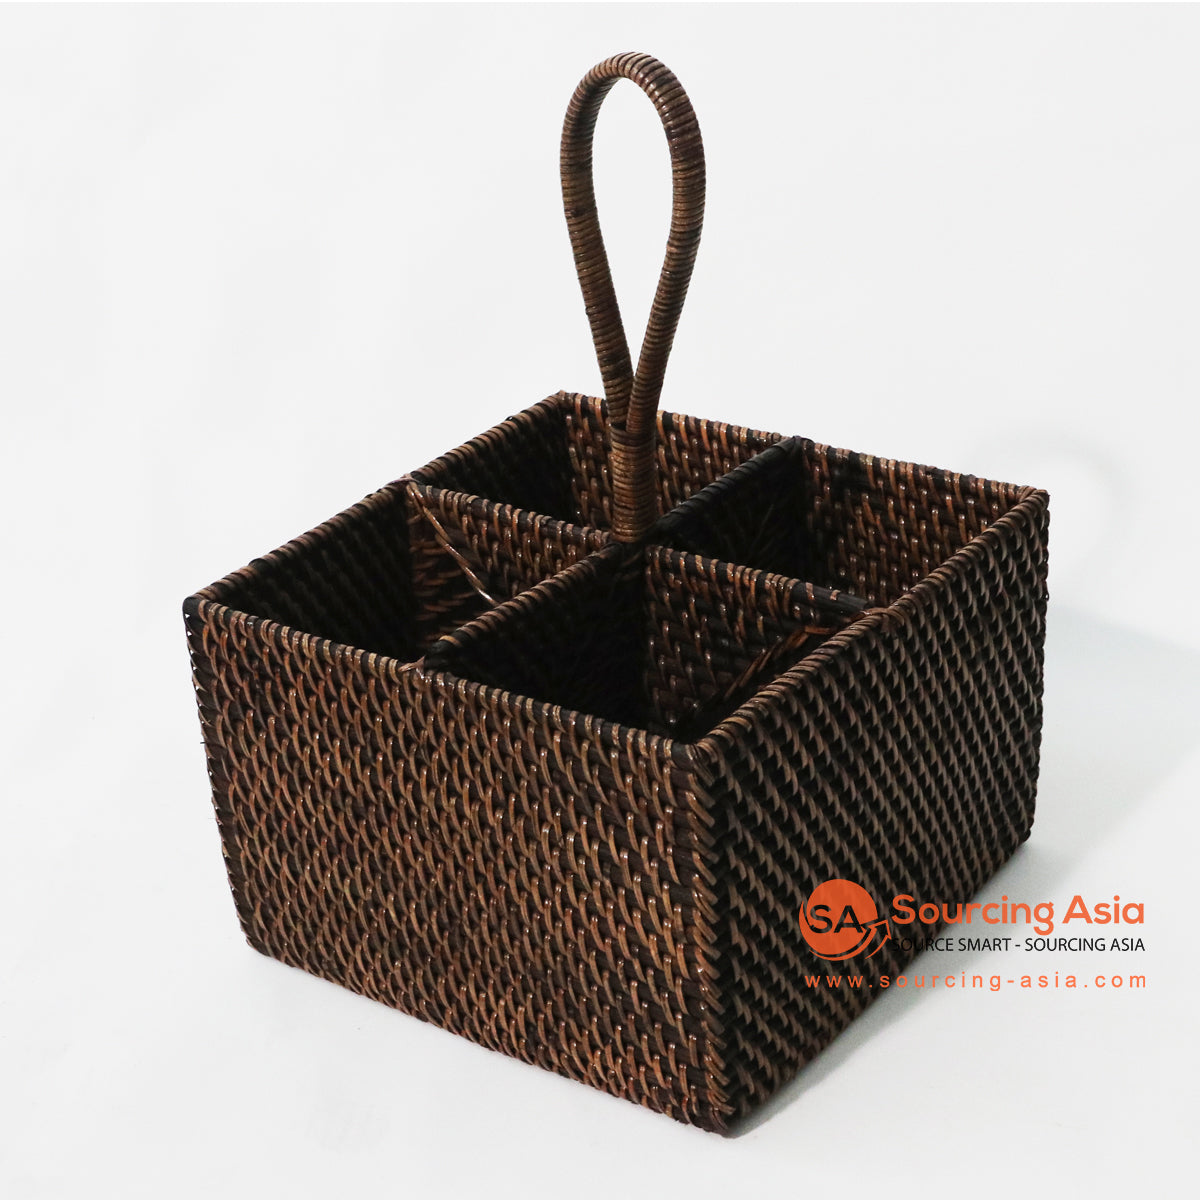 MTI120 DARK BROWN WOVEN RATTAN FOUR SLOTS SQUARE CUTLERY HOLDER WITH HANDLE